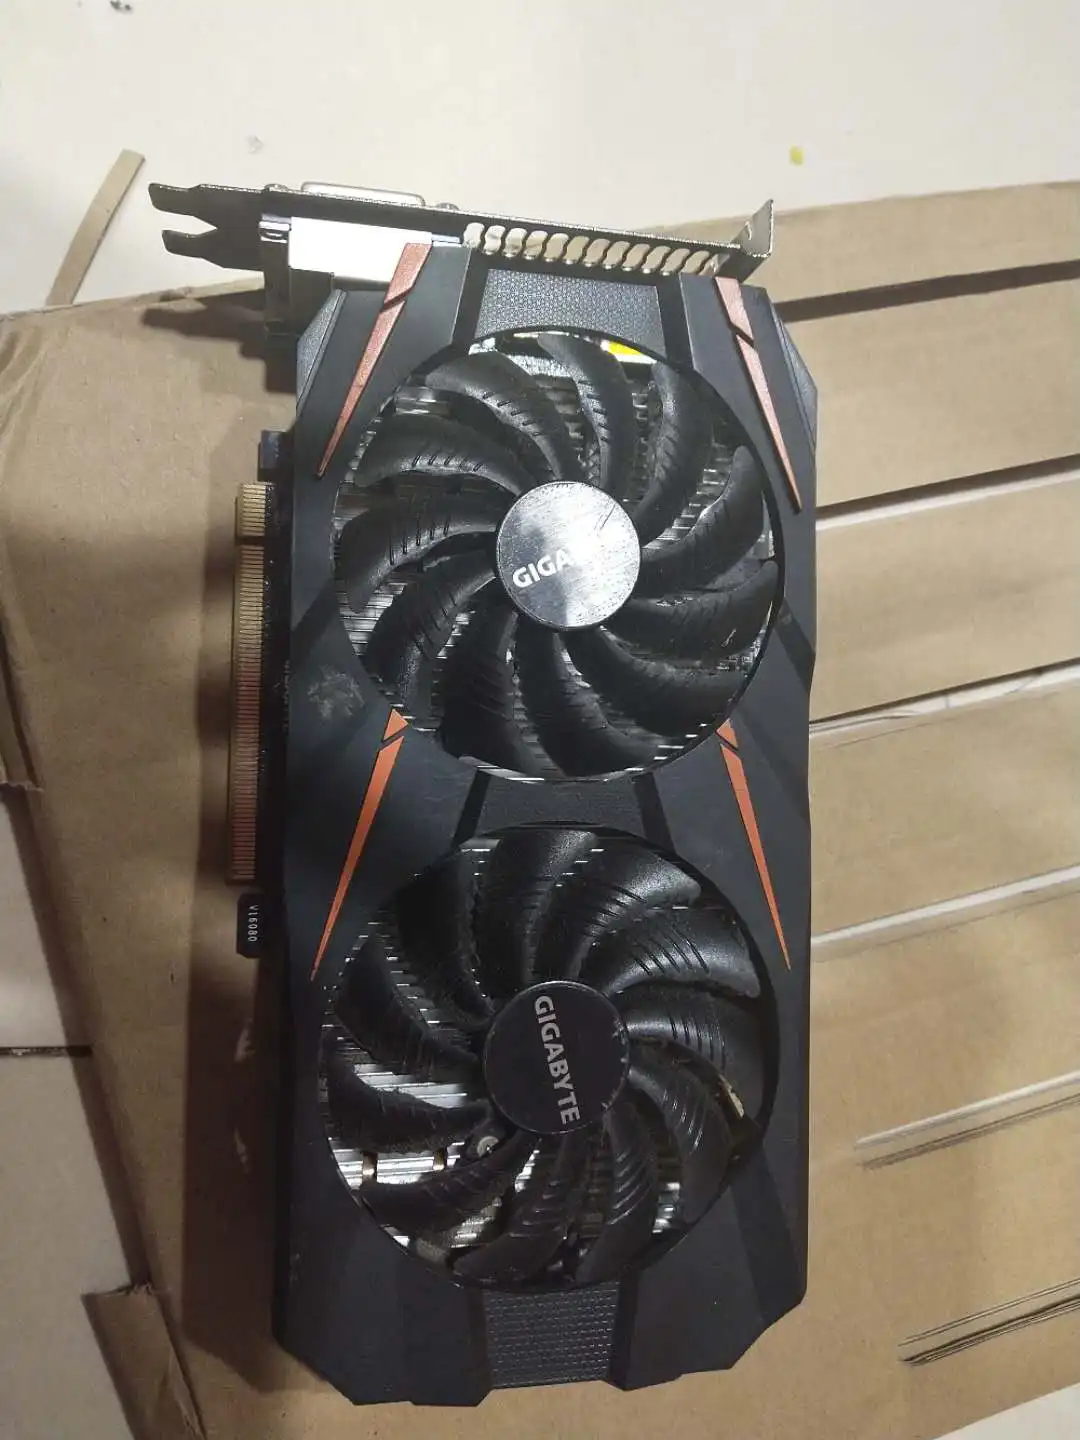 Hot Sale Graphics Card Used 1060 For Gaming Desktop Graphics+card - Buy Hot Sale Graphics Card,Used Gt 1060 Desktop Graphics+card Product on Alibaba.com